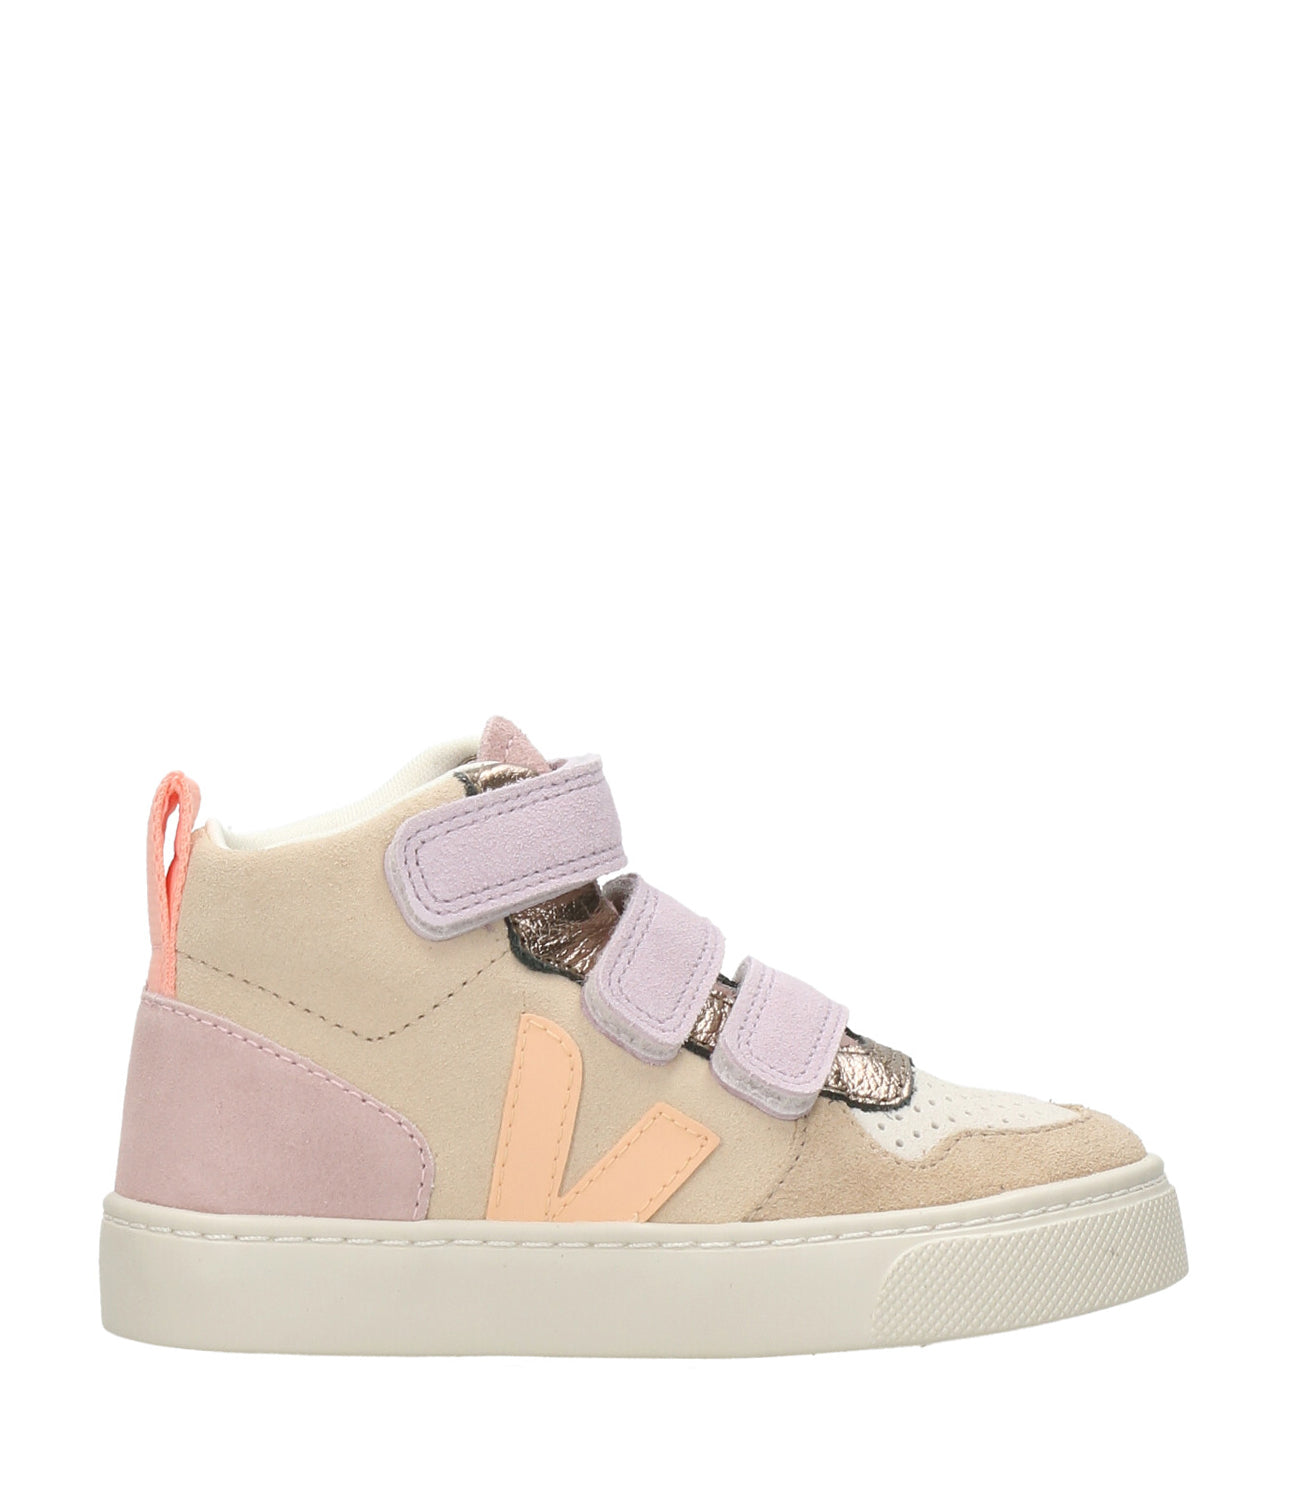 Veja Kids | Beige,White and Lilac Sneakers